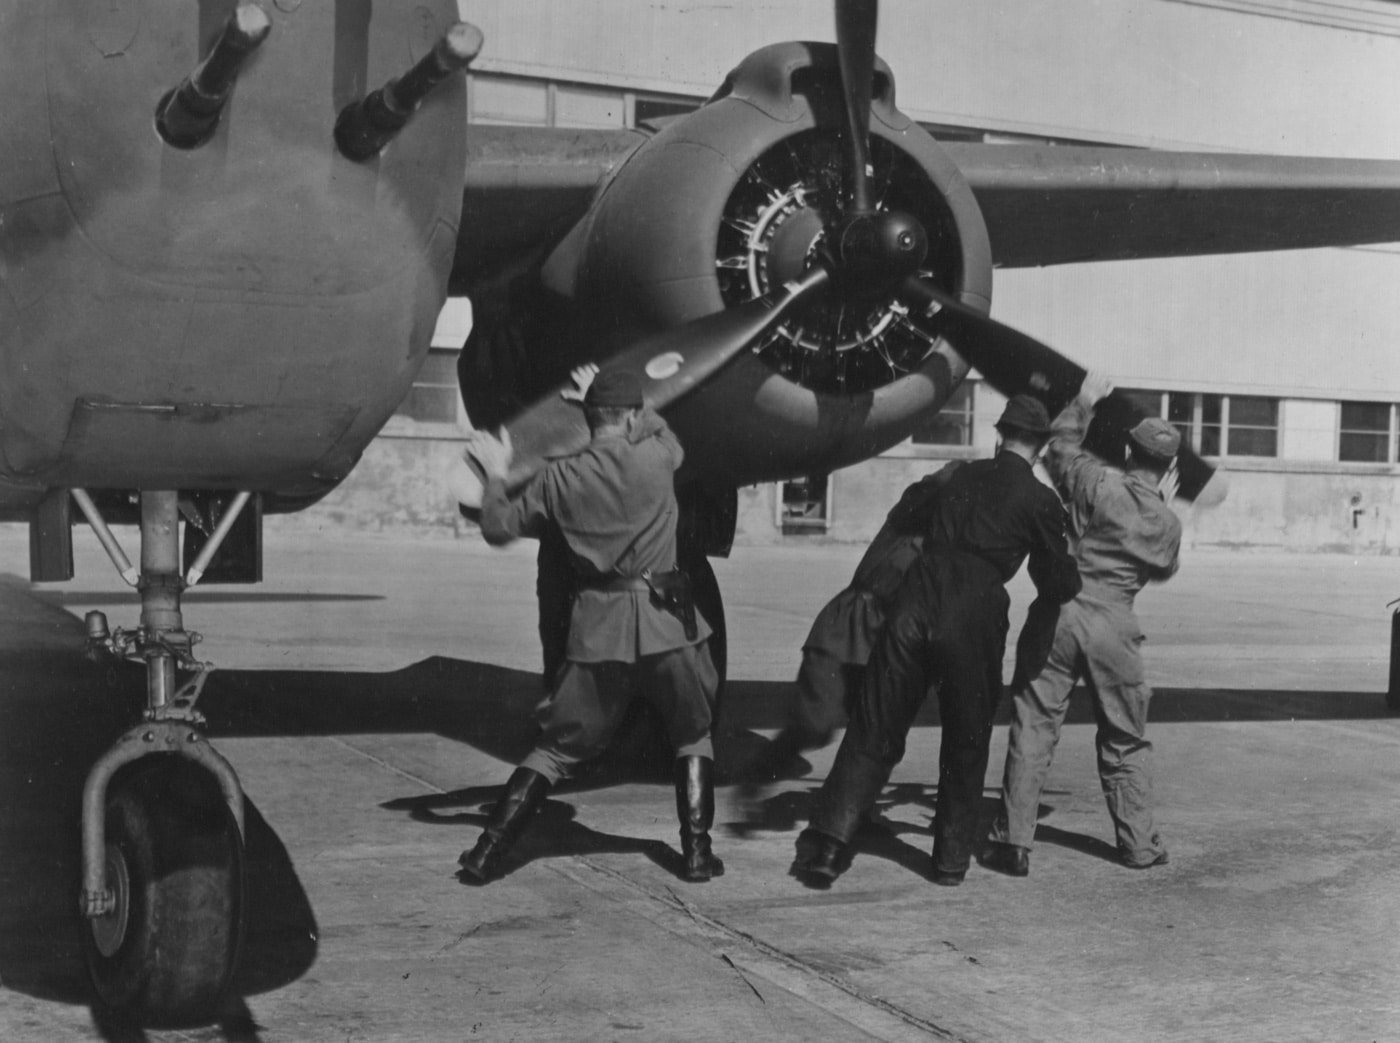 Shown in this image are four airmen of the Soviet Union taking custody of an A-20 Havoc. Soviet airmen take over a Lend-Lease Douglas A-20 Havoc at Ladd Field, Fairbanks, Alaska. First A-20 Havocs to Russia were delivered at Ladd Field in October 1942 and have been flowing in increasing numbers.